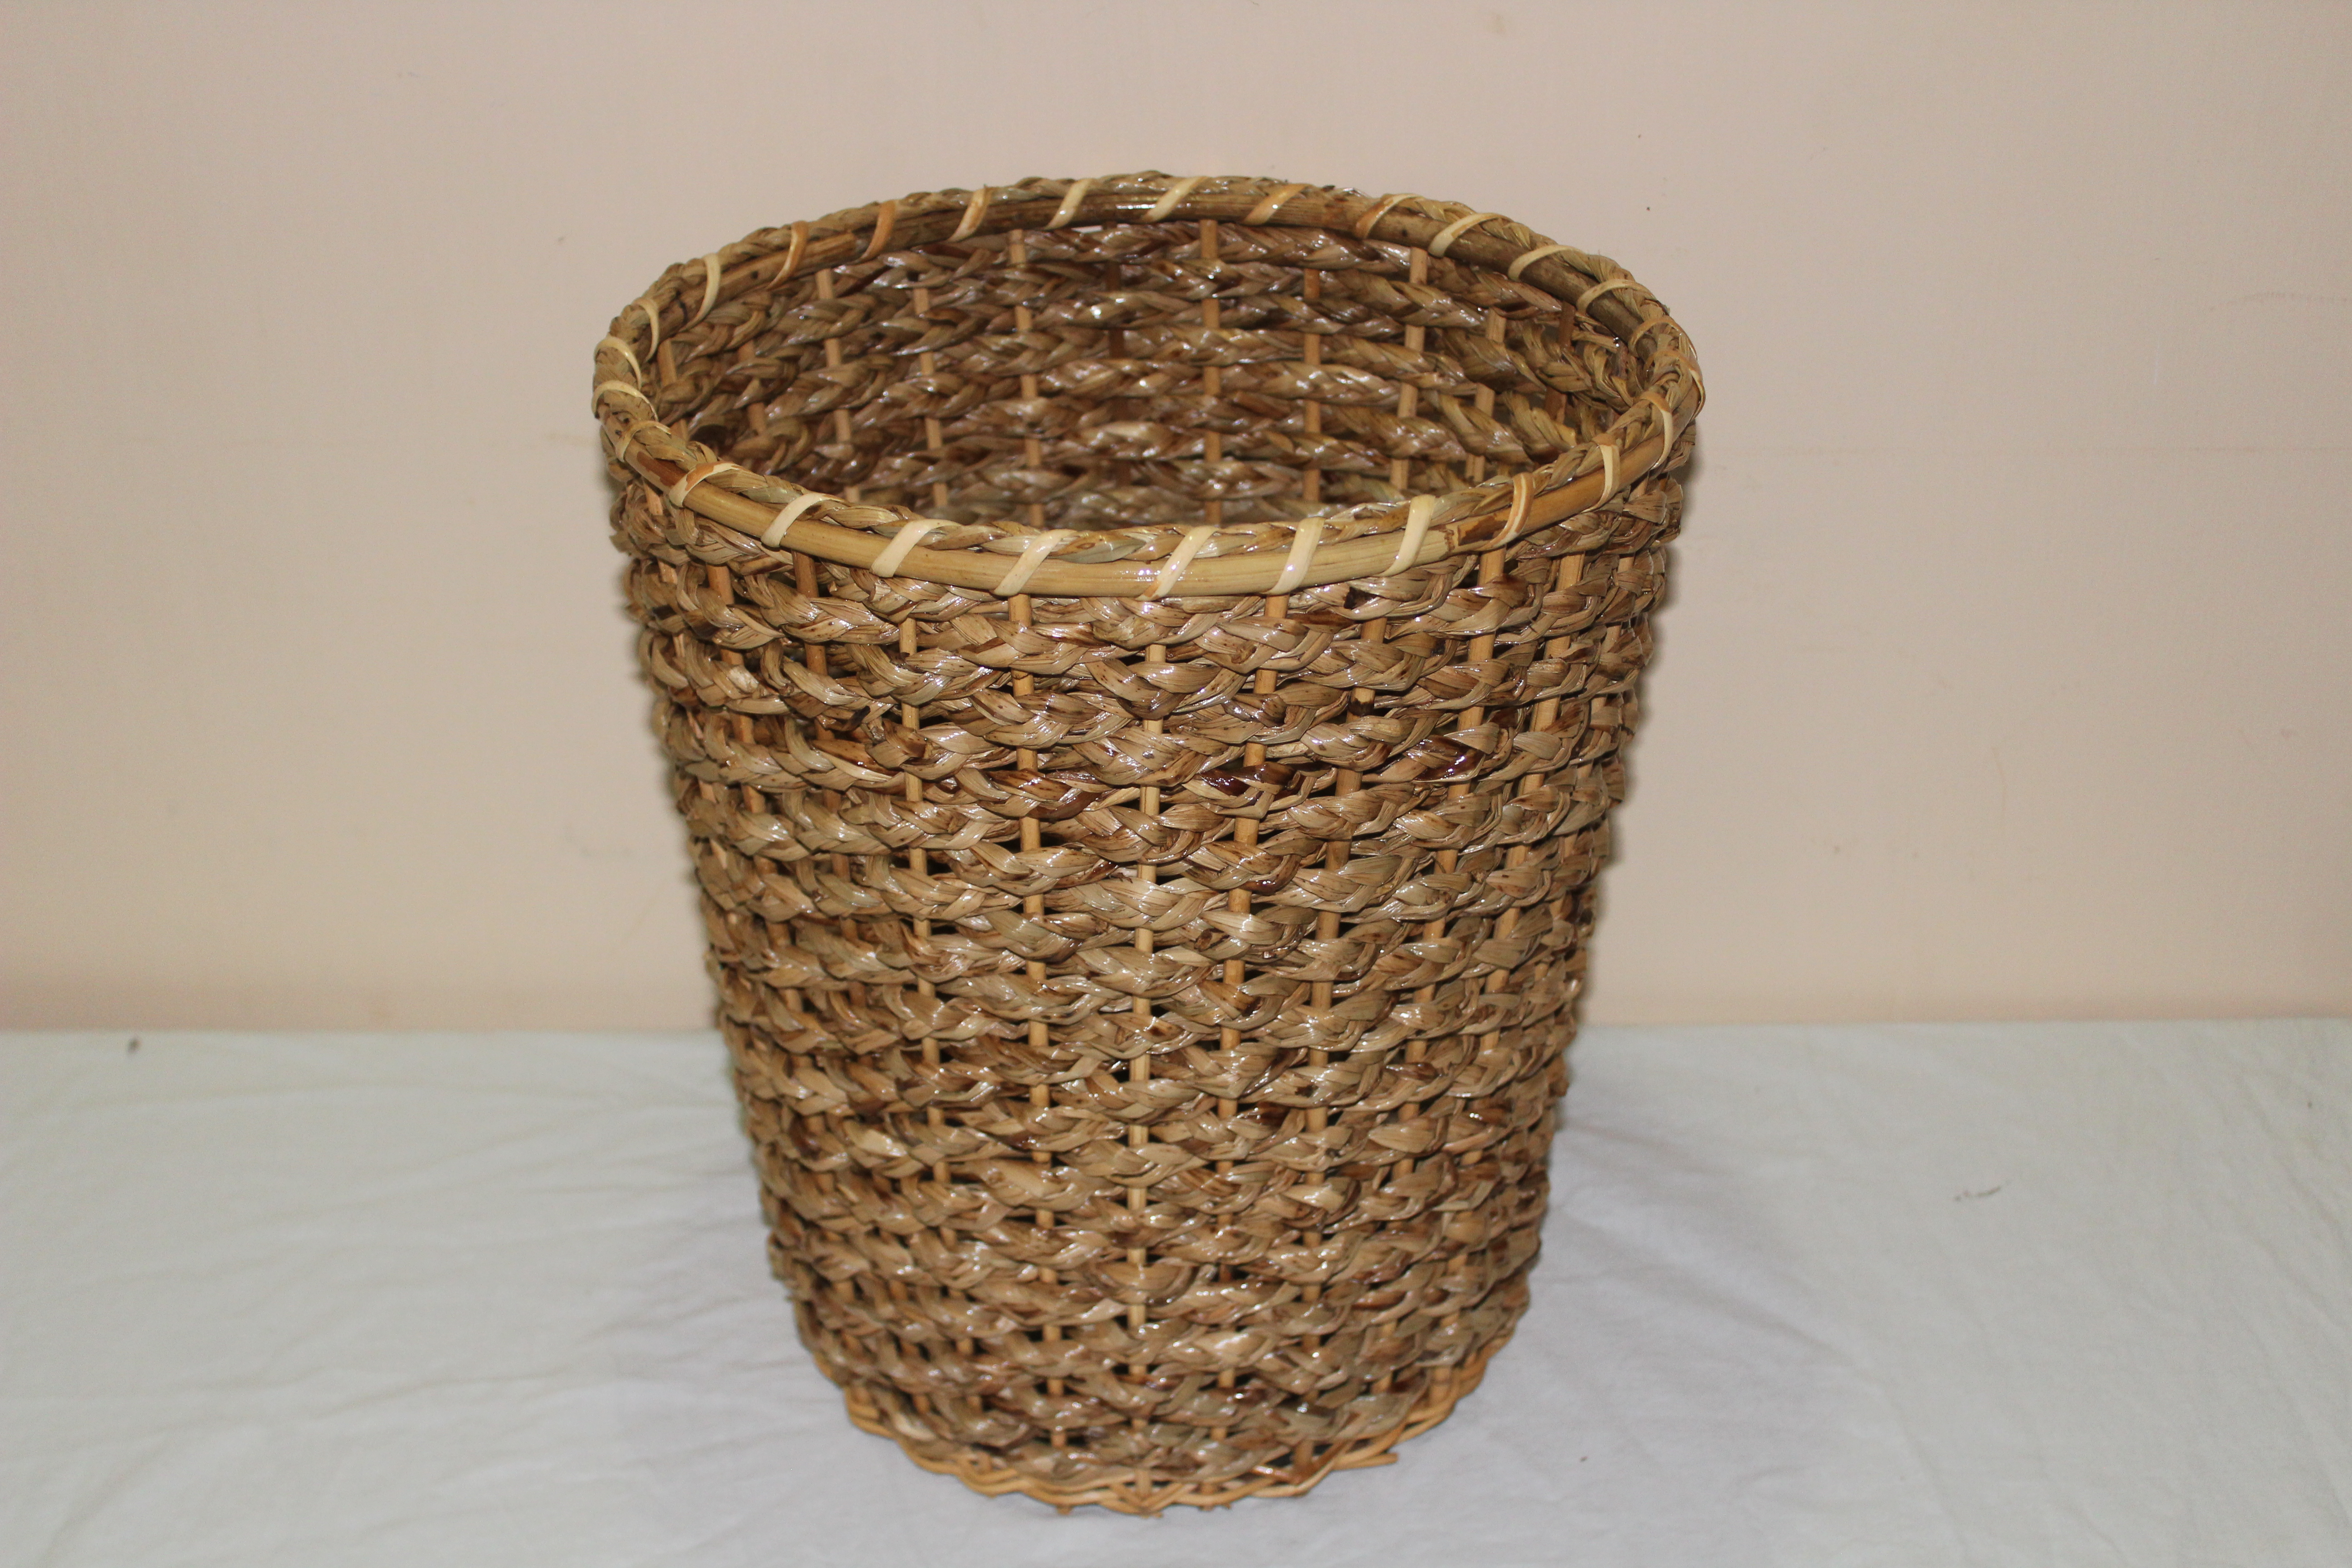 Cylindrical wicker basket made of reed